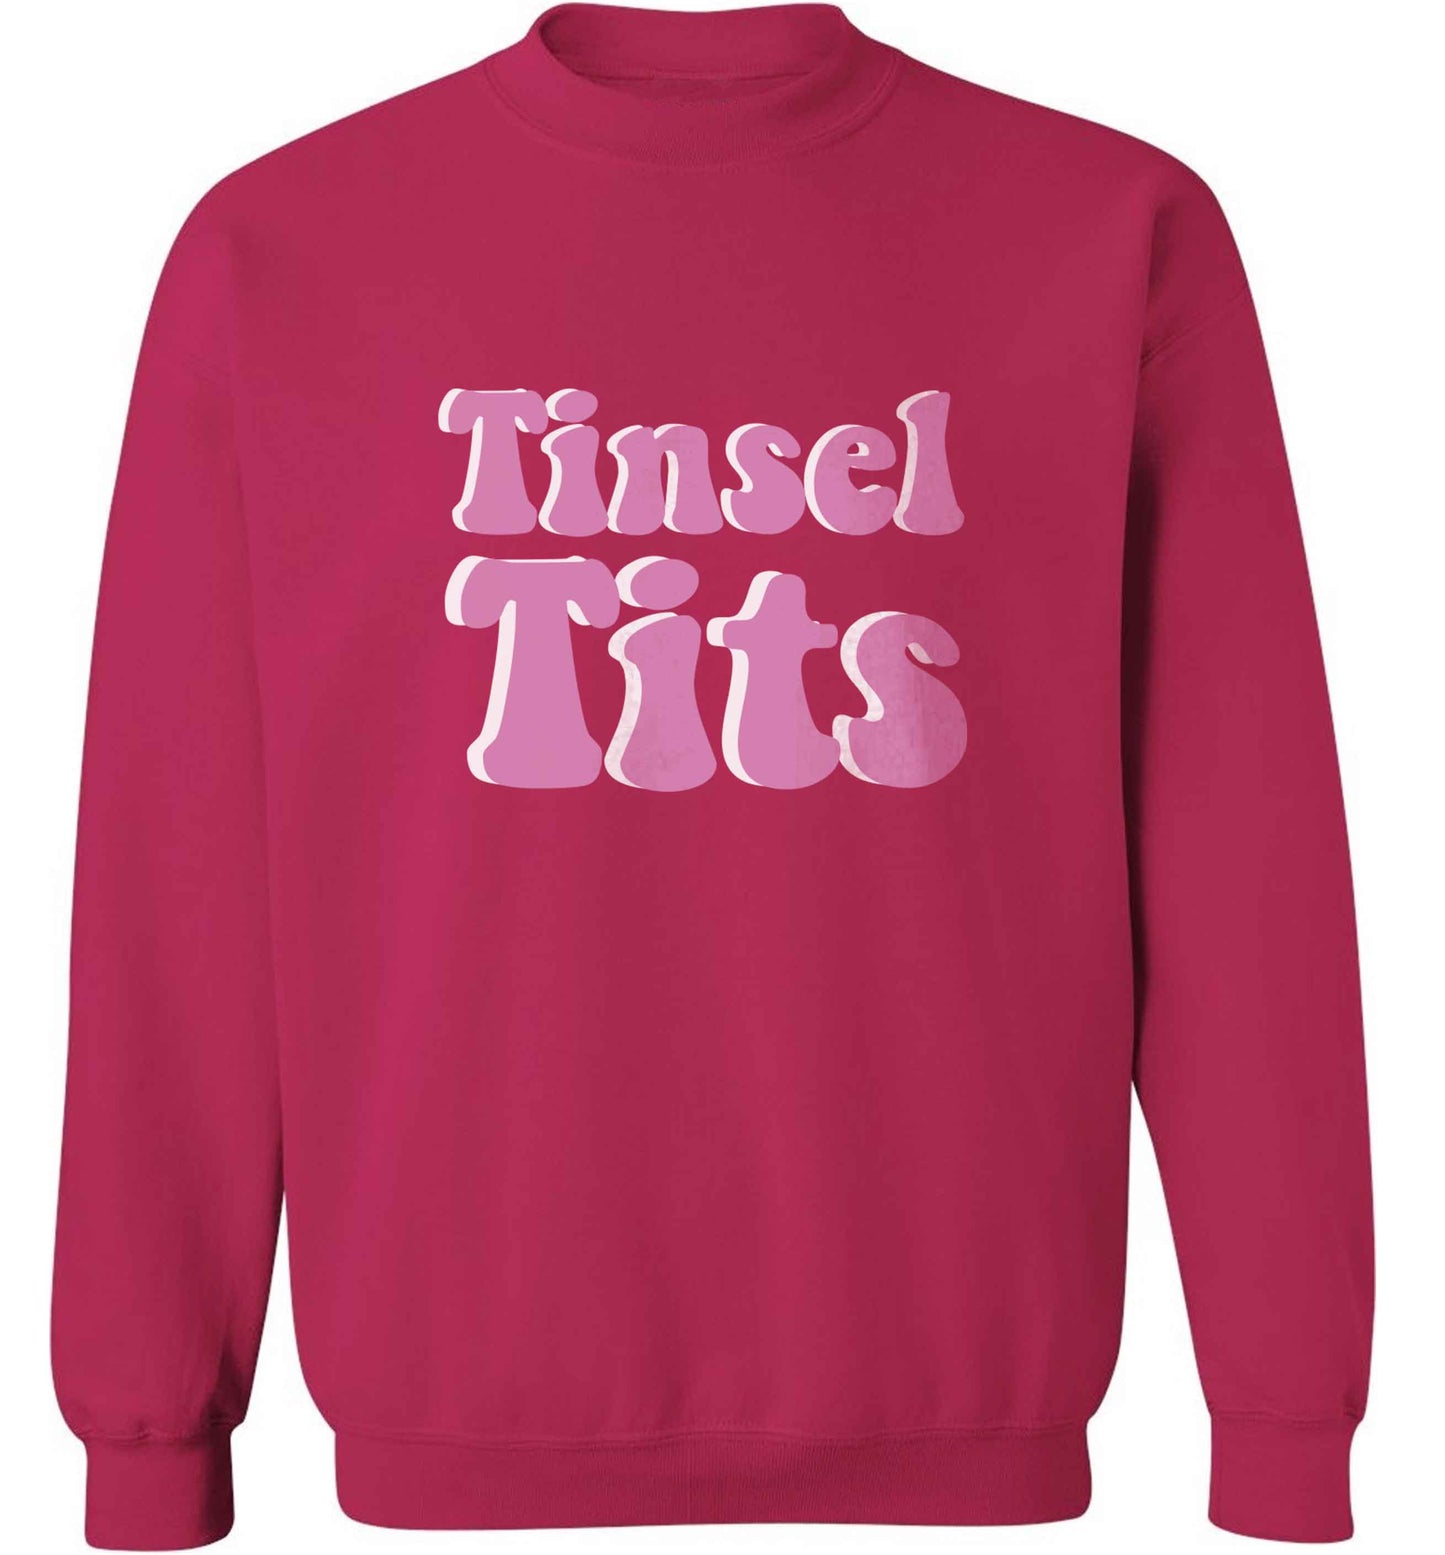 Tinsel tits adult's unisex pink sweater 2XL